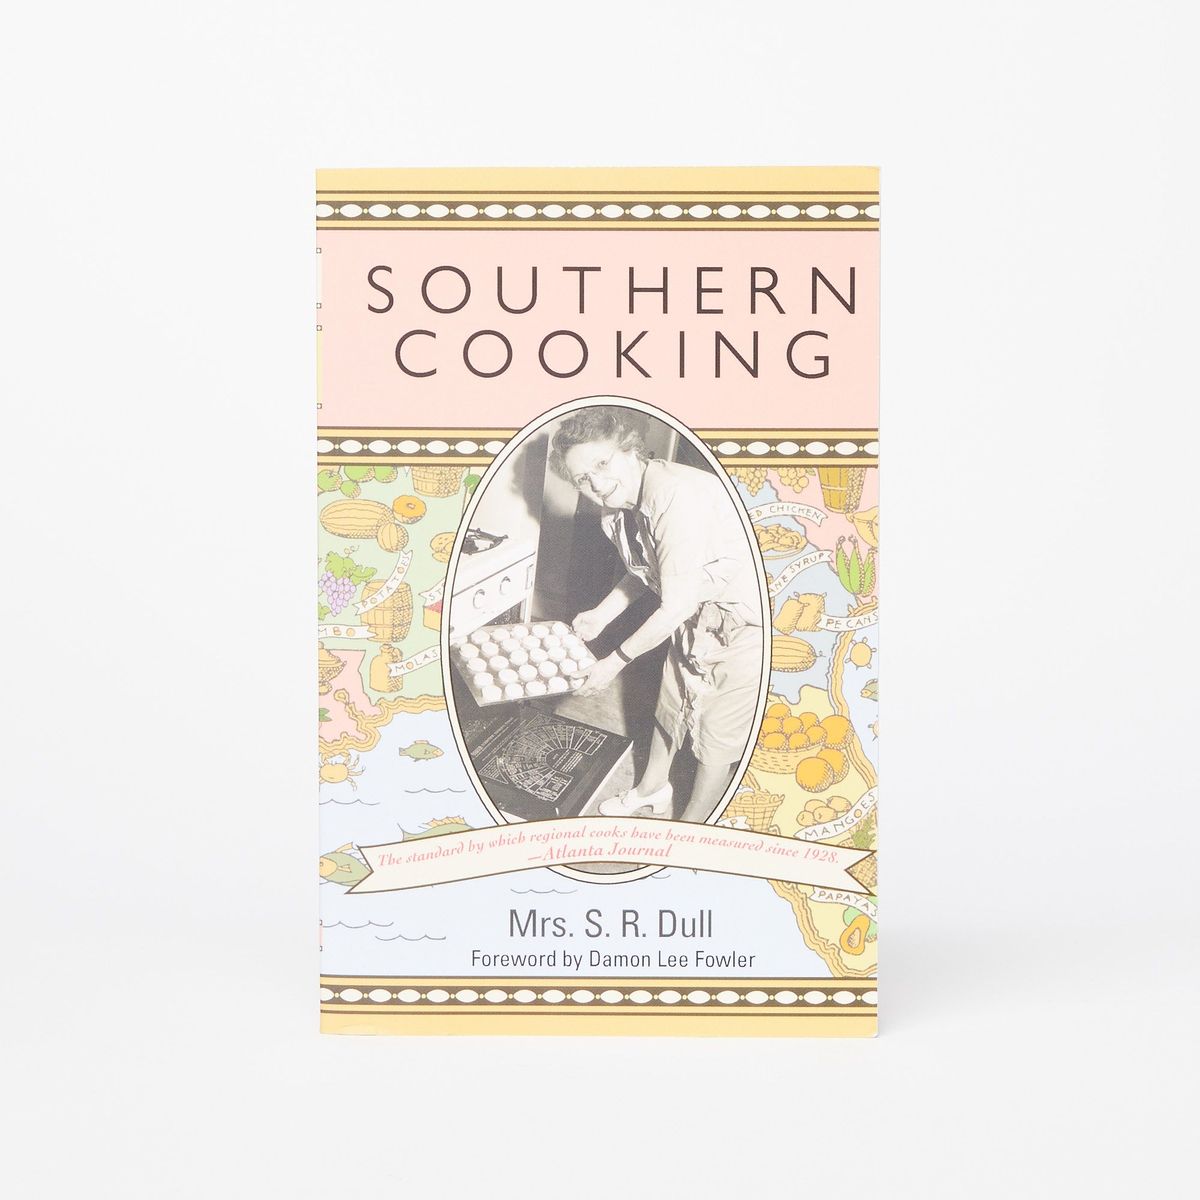 Cover of a cookbook with yellow, brown, and pink stripes that reads "Southern Cooking" with a photo of a person holding a sheet pan near an open oven